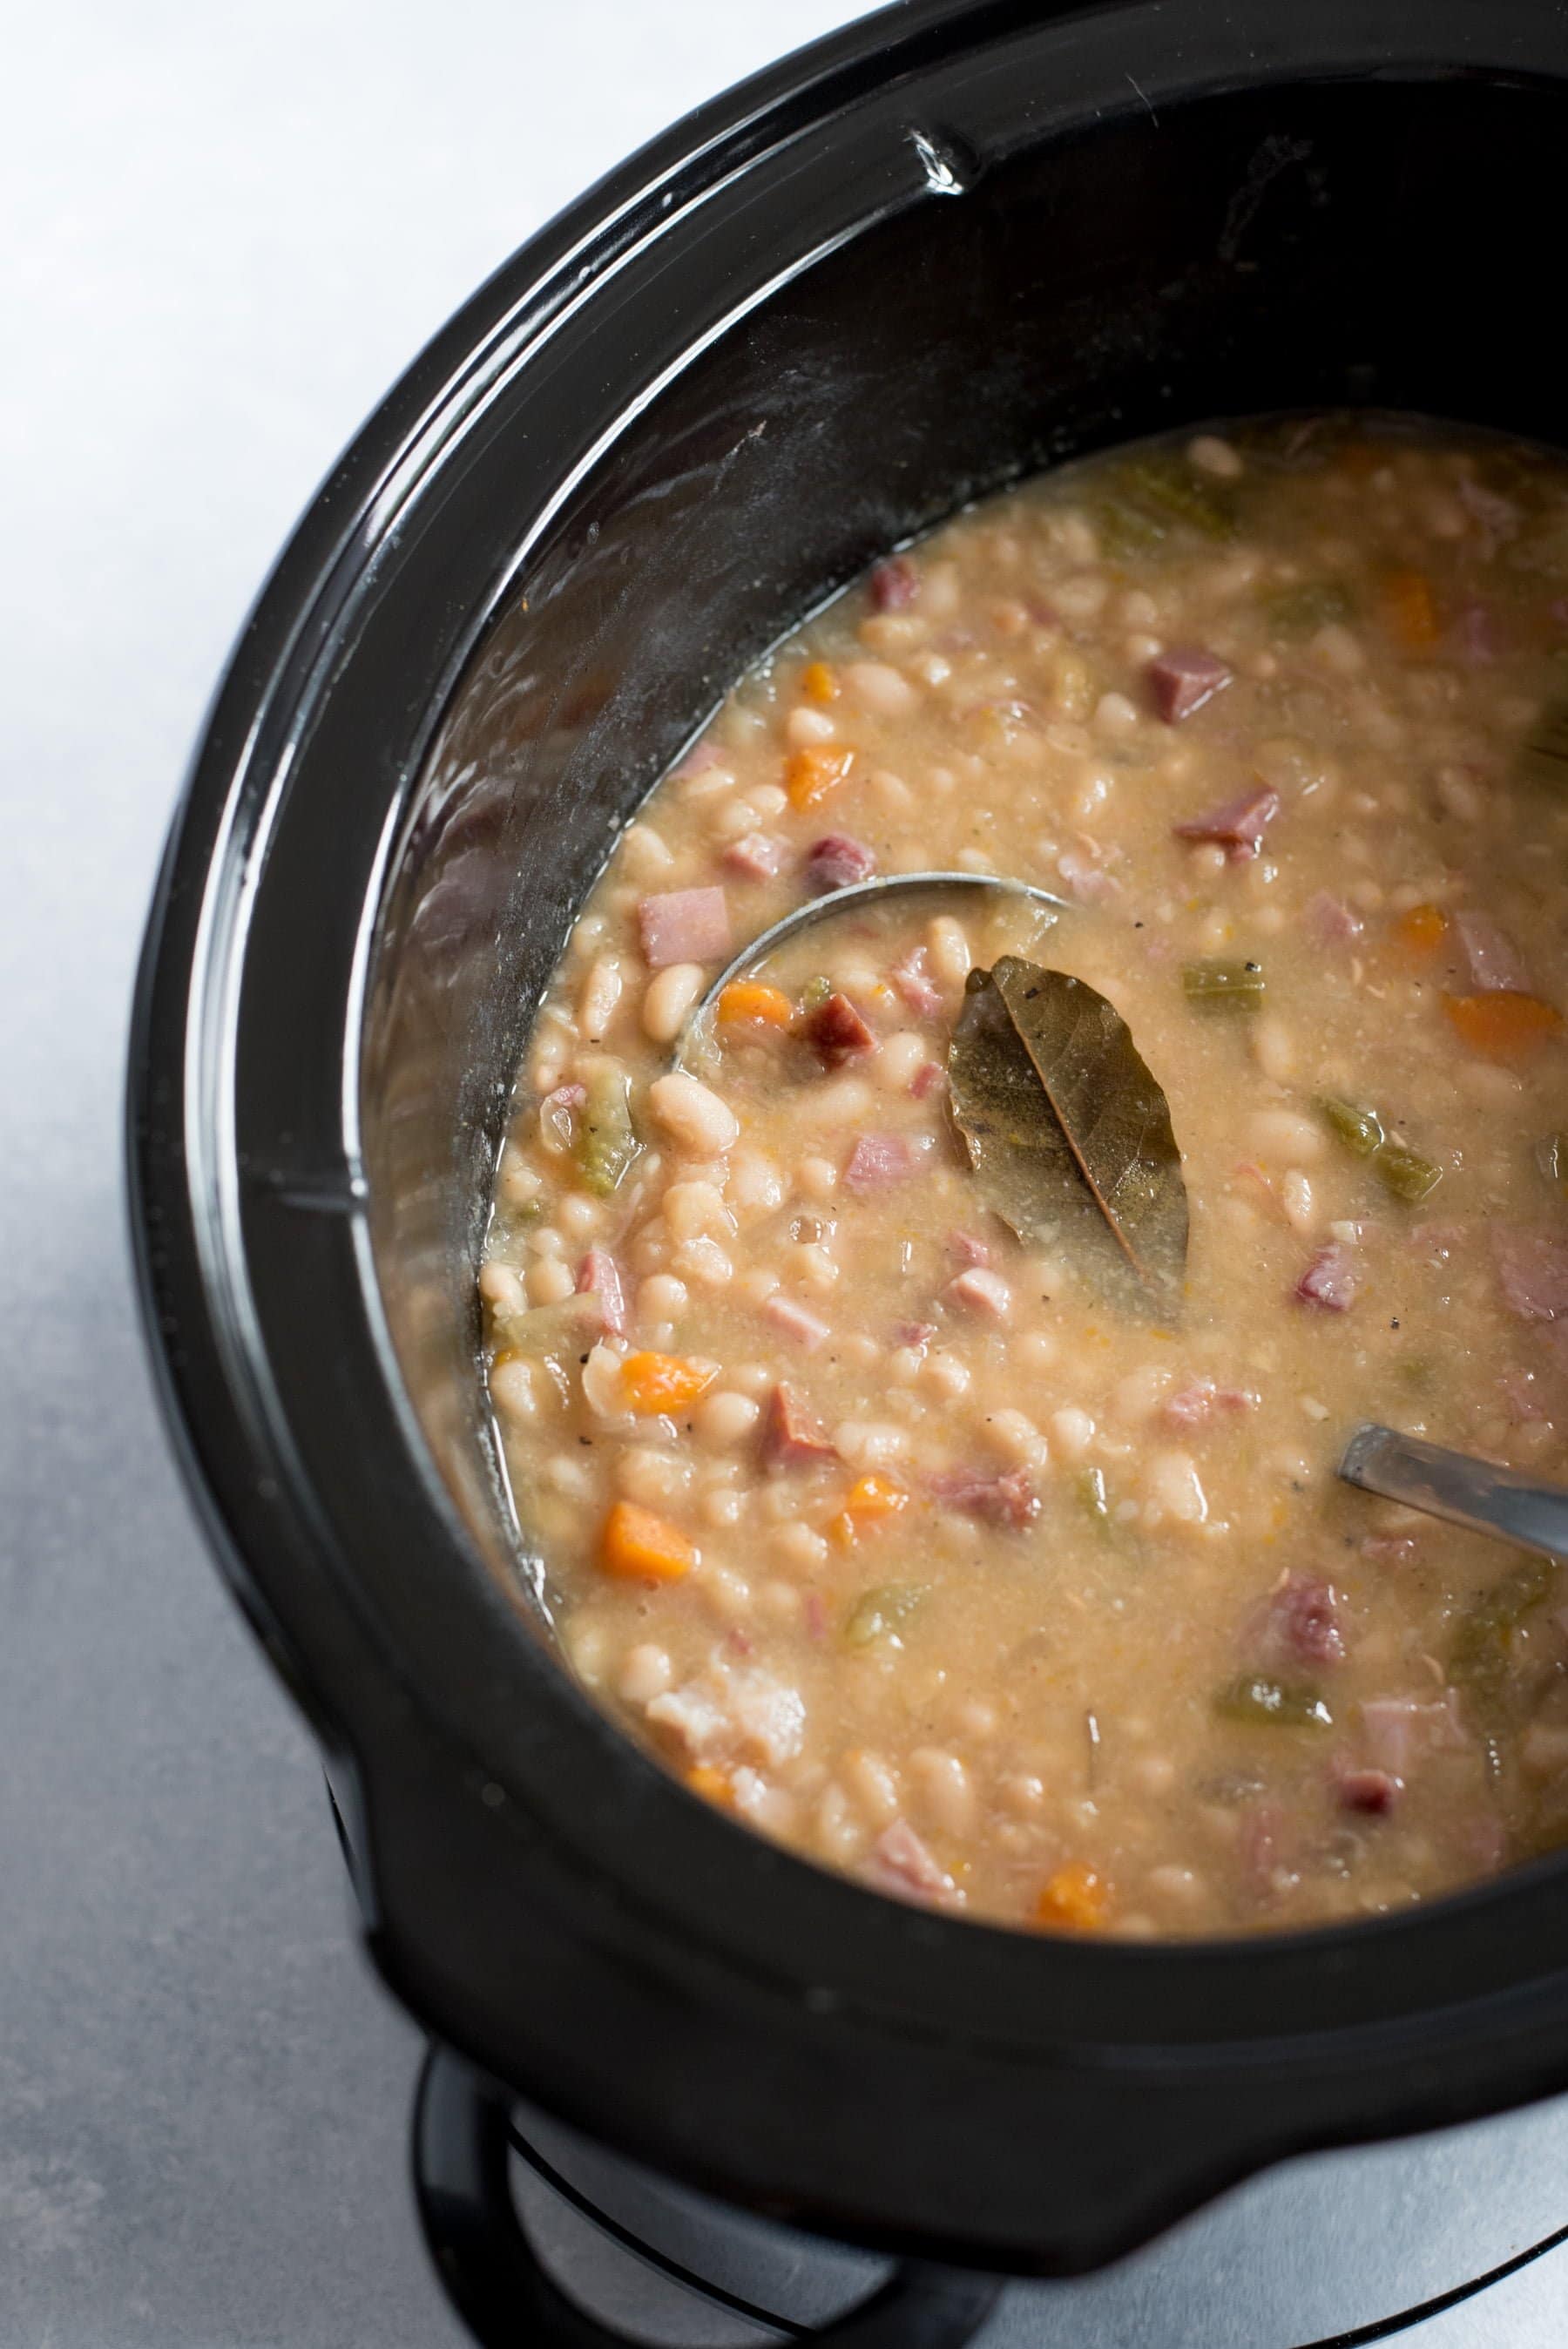 Bean soup cooks inside of a black slow cooker. A Bay leaf is seen floating on top, as a ladle dips into the pot.